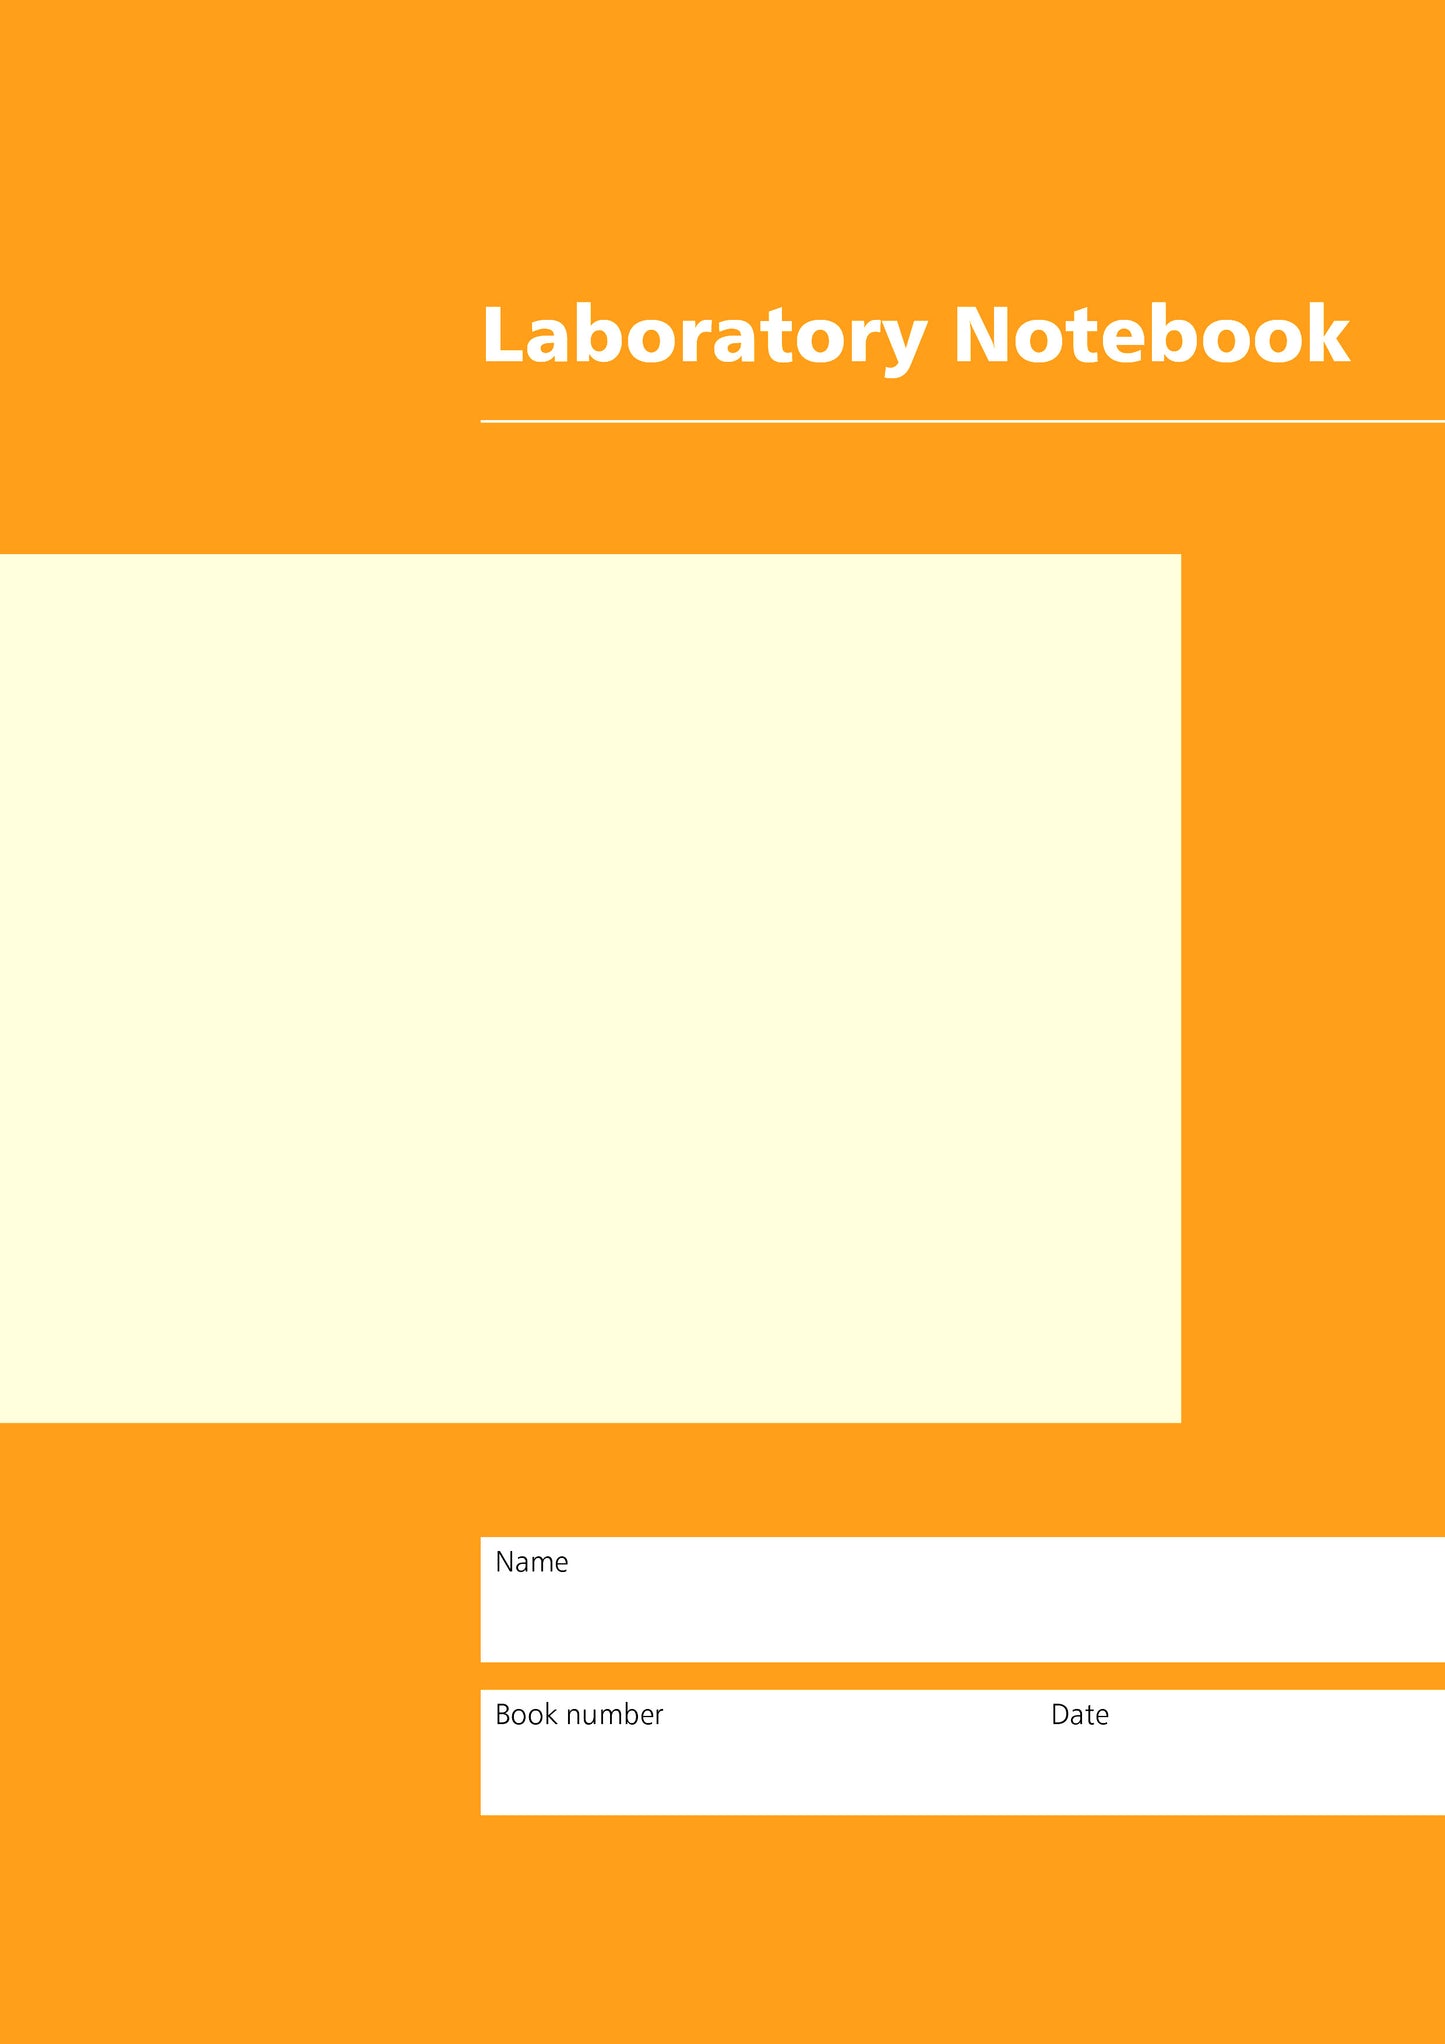 Code A02: A4 laboratory notebook – hardback, 216 pages with 6mm ruled line spacing